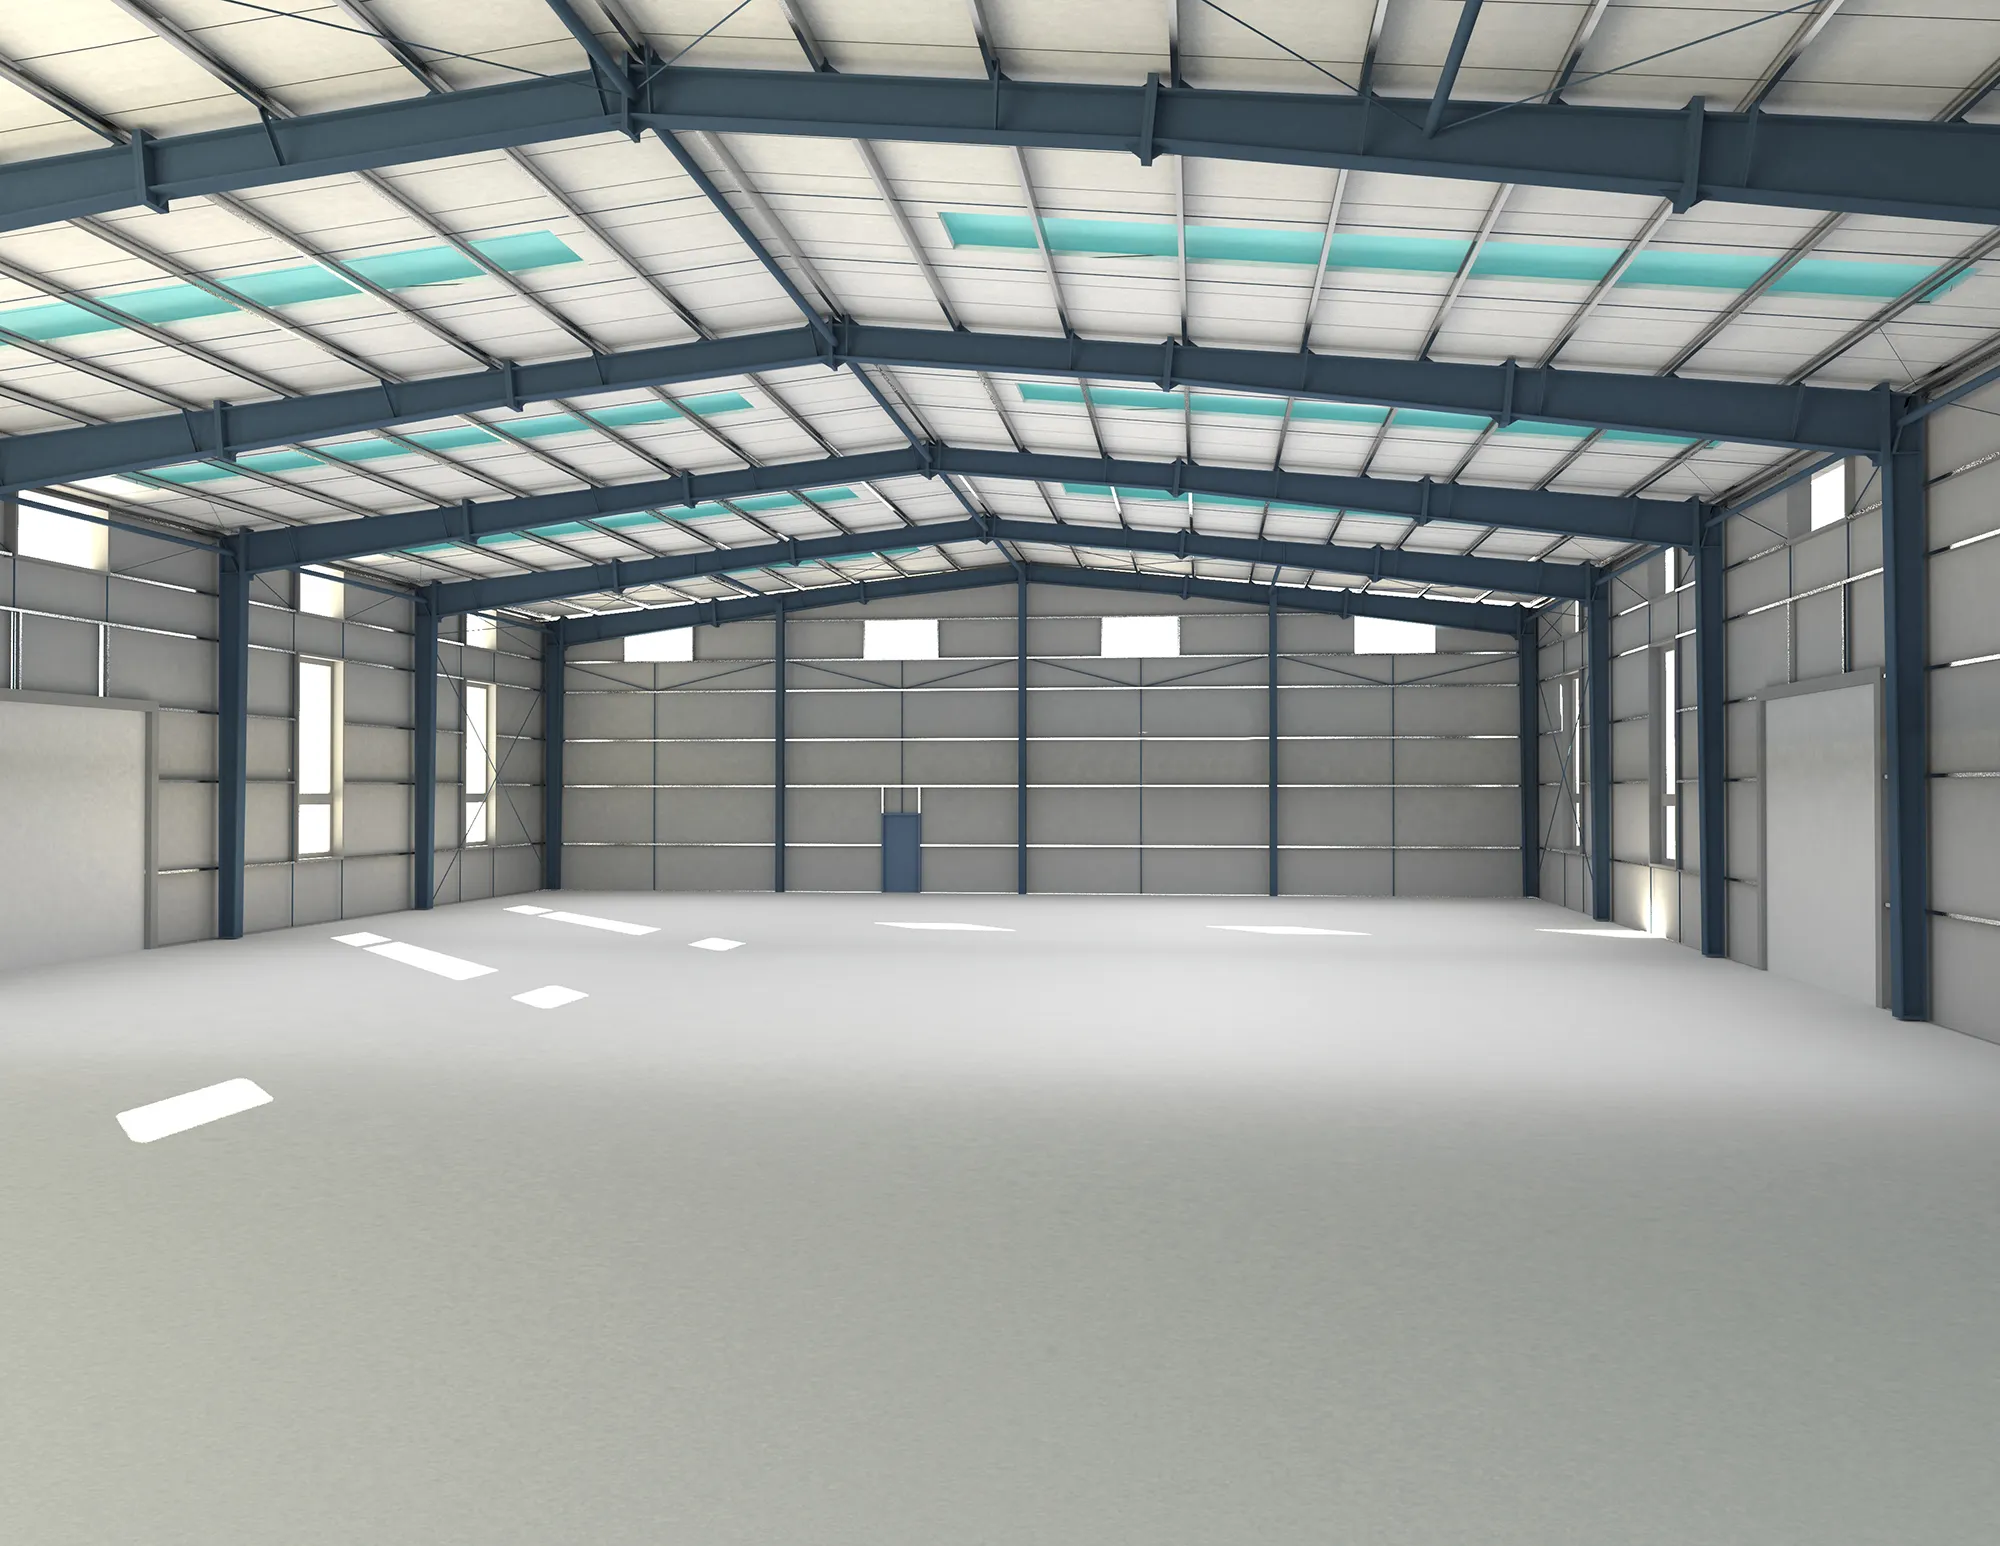 Clear span large span warehouse prefabricated steel structure building